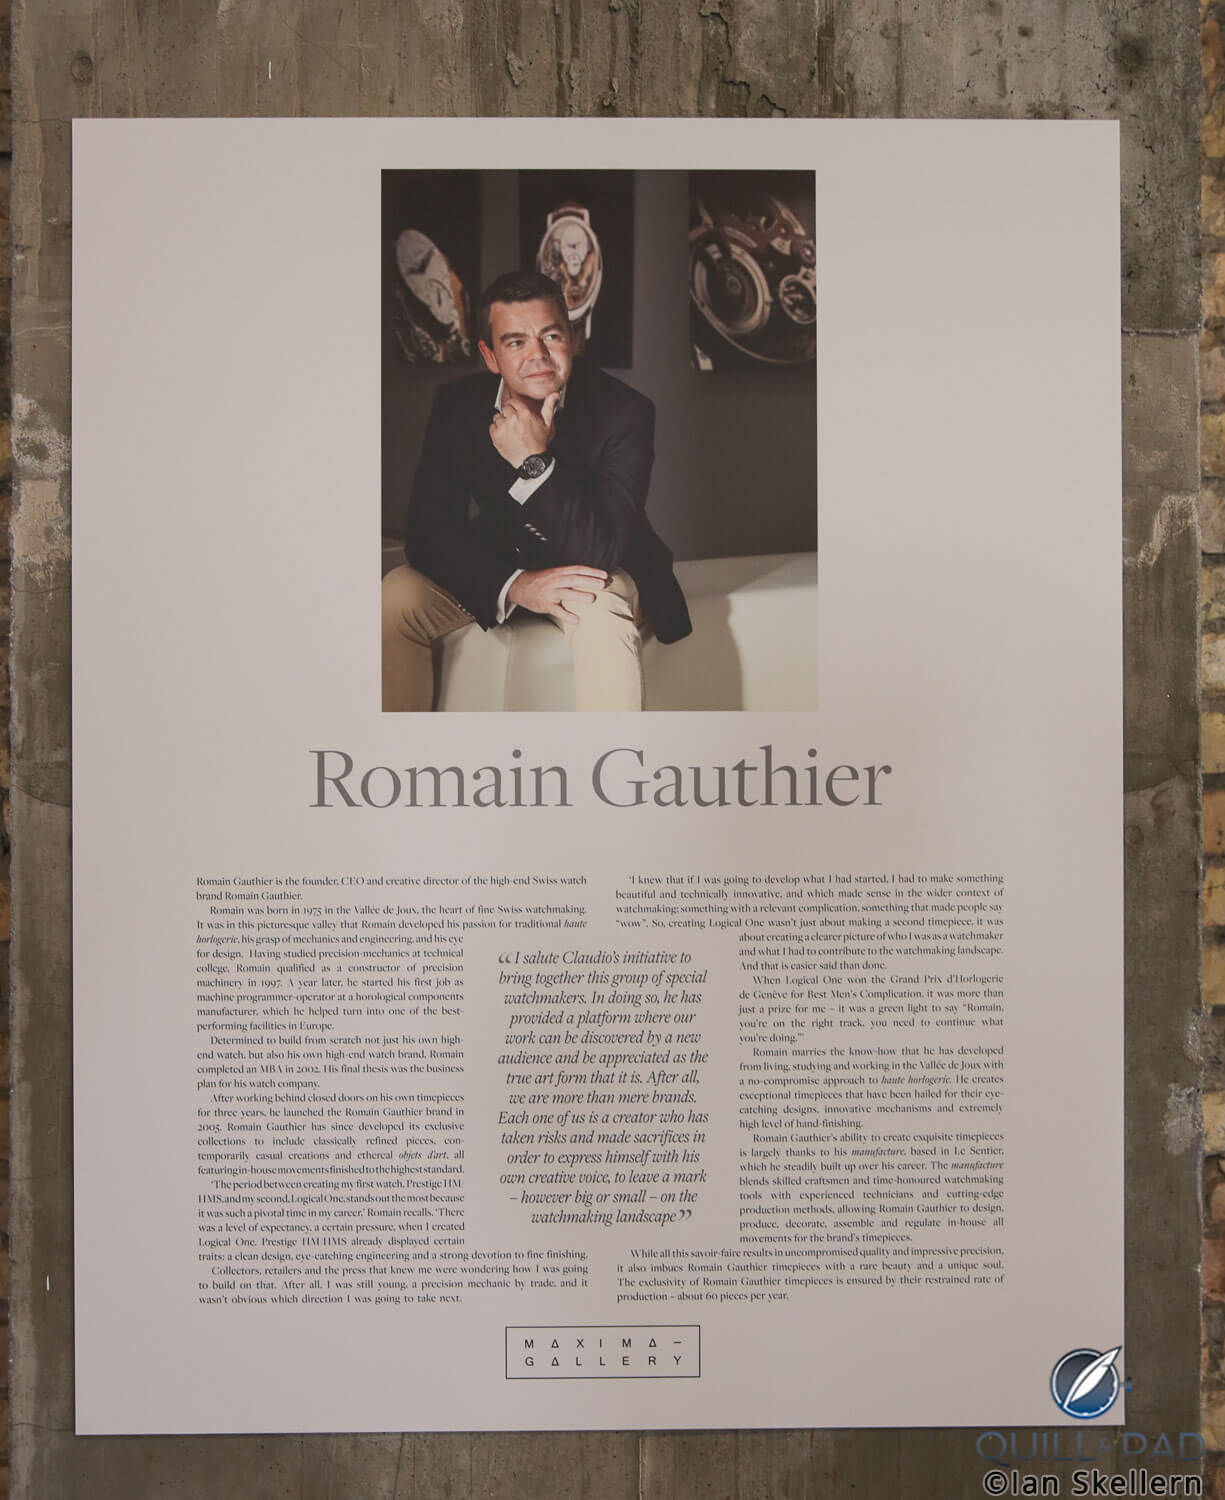 Roman Gauthier was at the exhibition opening night both in person and on the wall